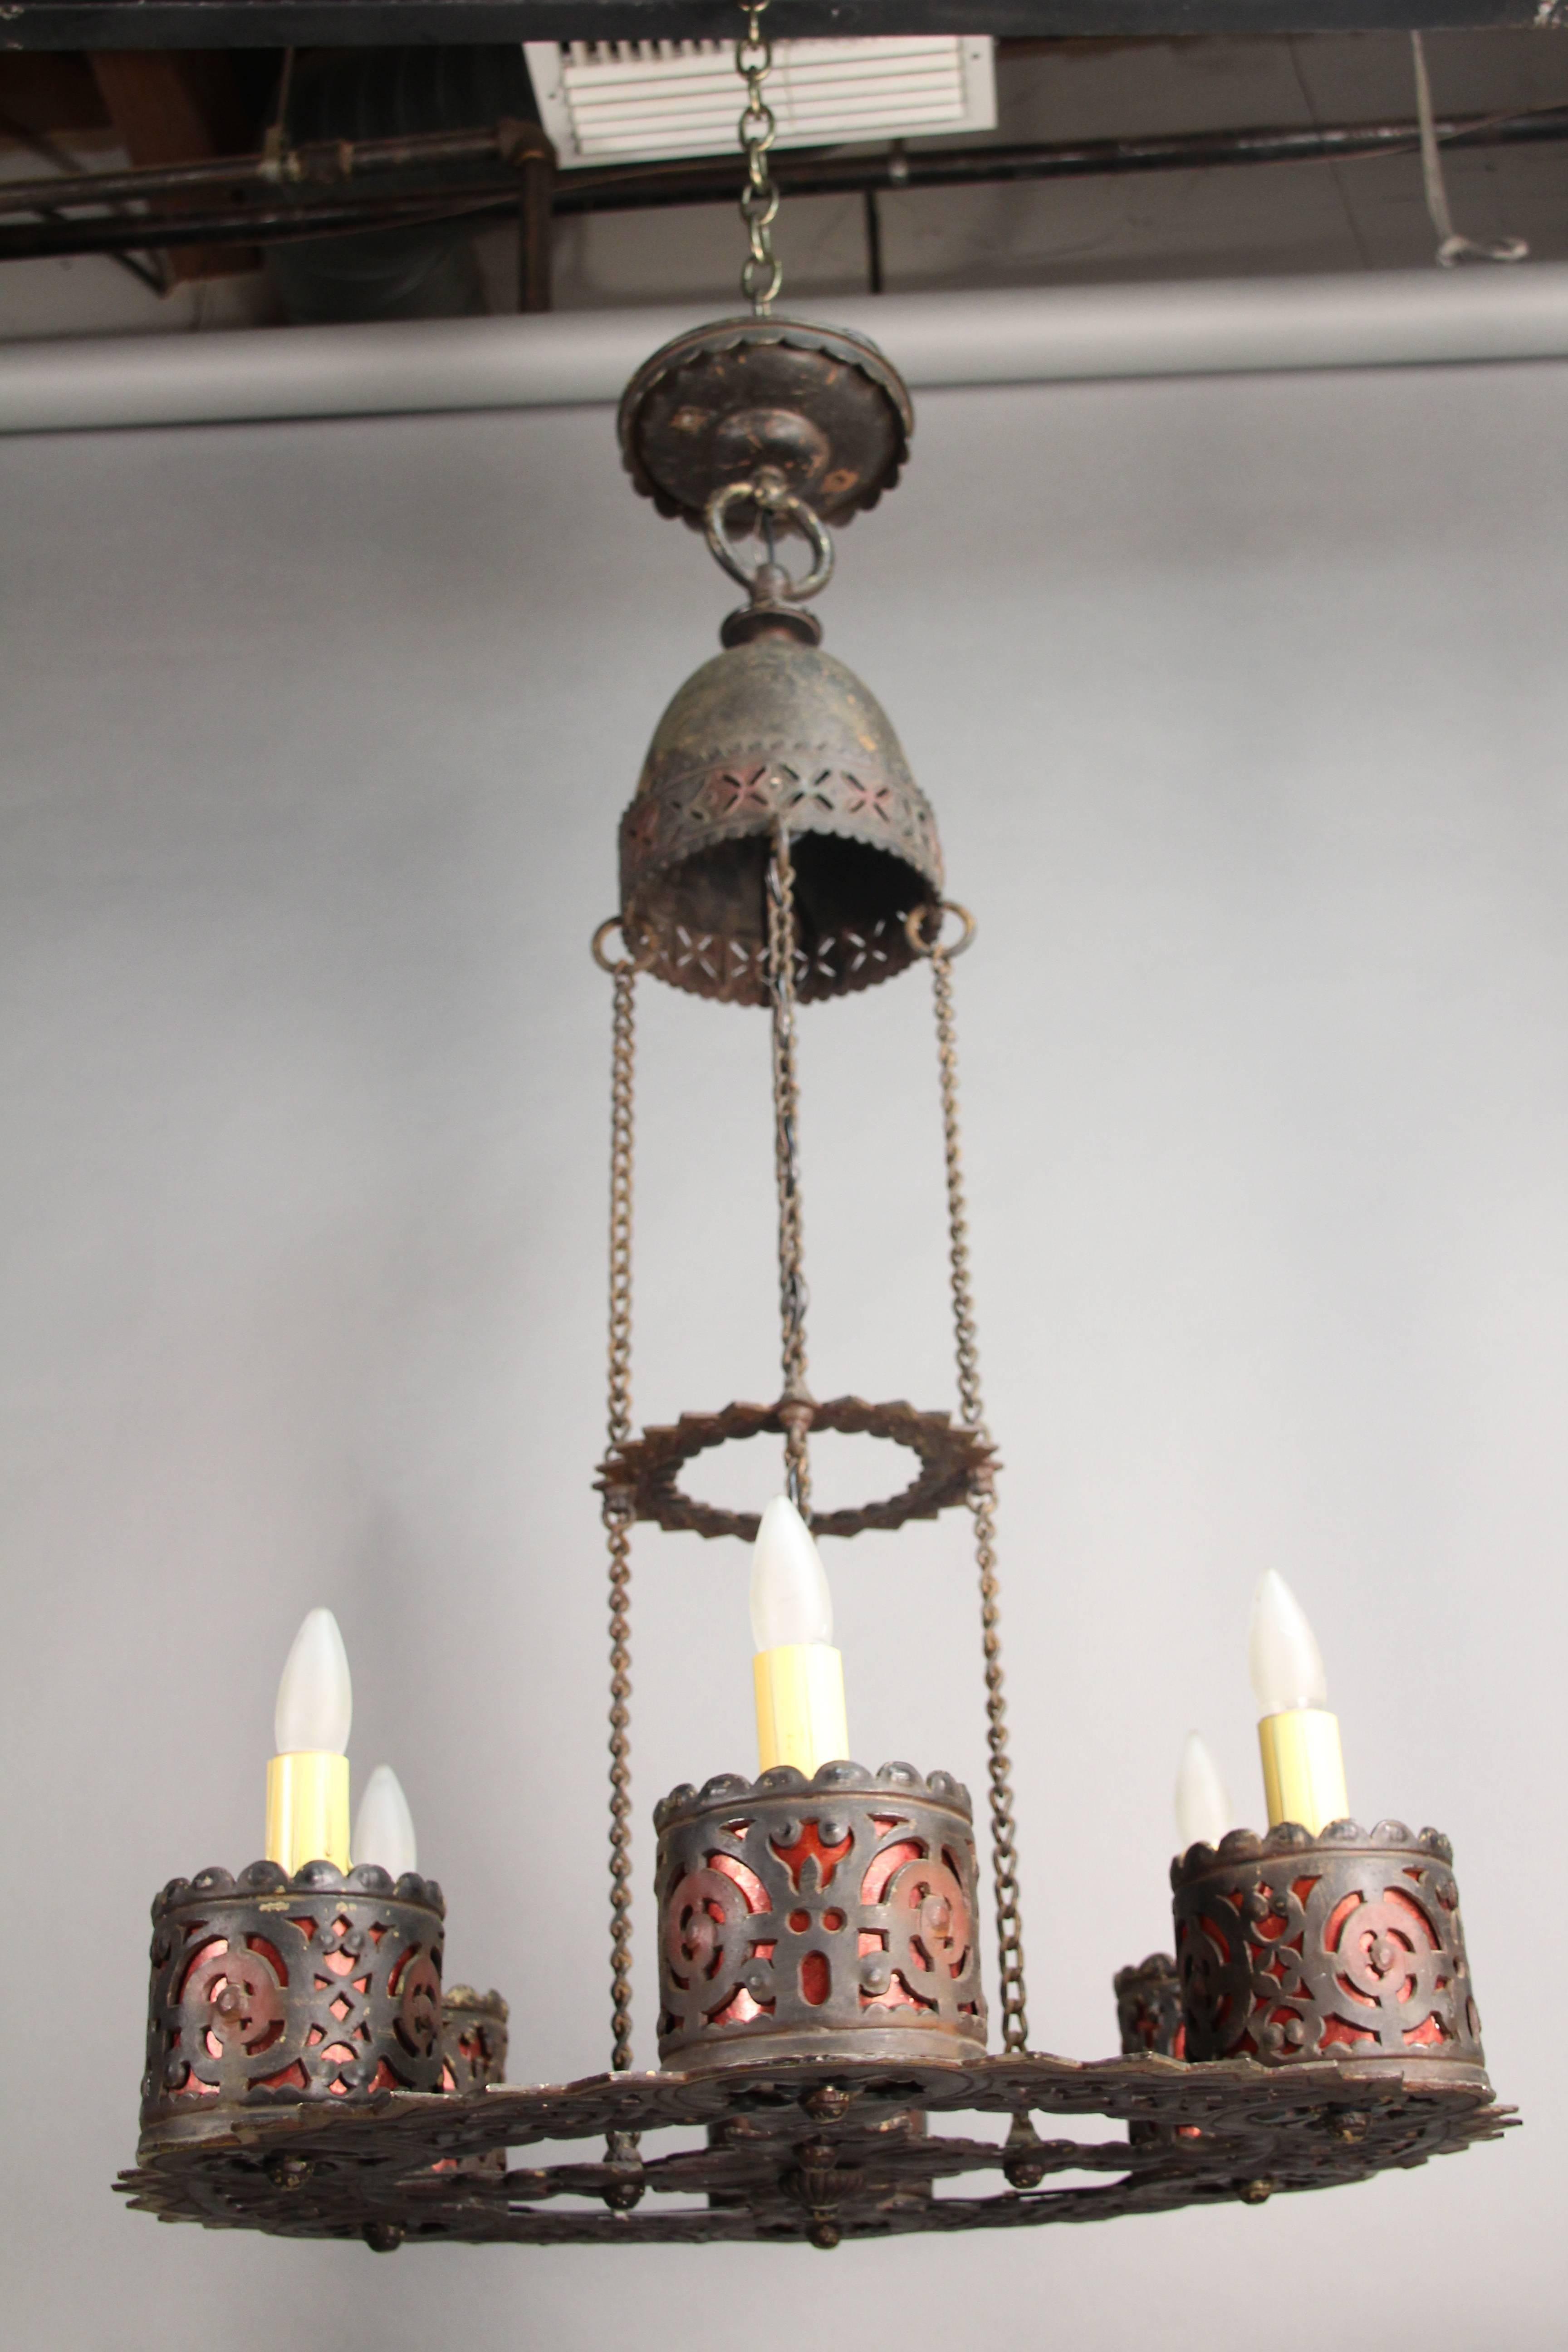 Great large-scale Spanish Revival 1920s chandelier with great metal work and intricate cut-outs. Original finish six lights
Measure: 41 1/8